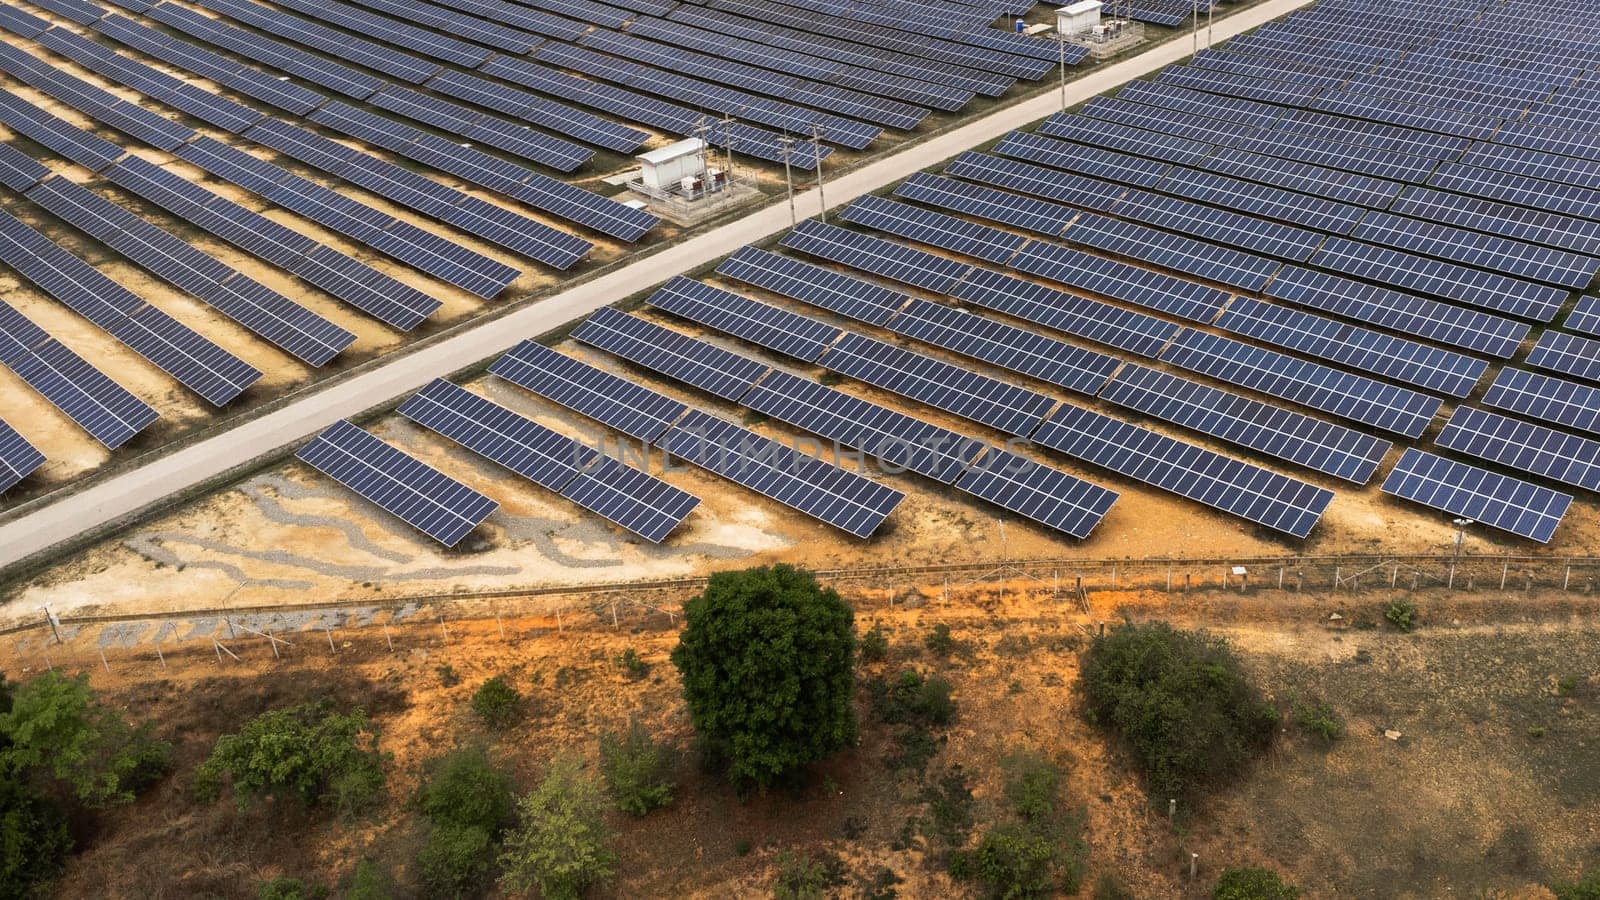 Top view on photovoltaic solar power panels. Drone aerial view of Solar panels system power generators from sun. Alternative Energy Sources - The Concept of Sustainable Resources. by TEERASAK